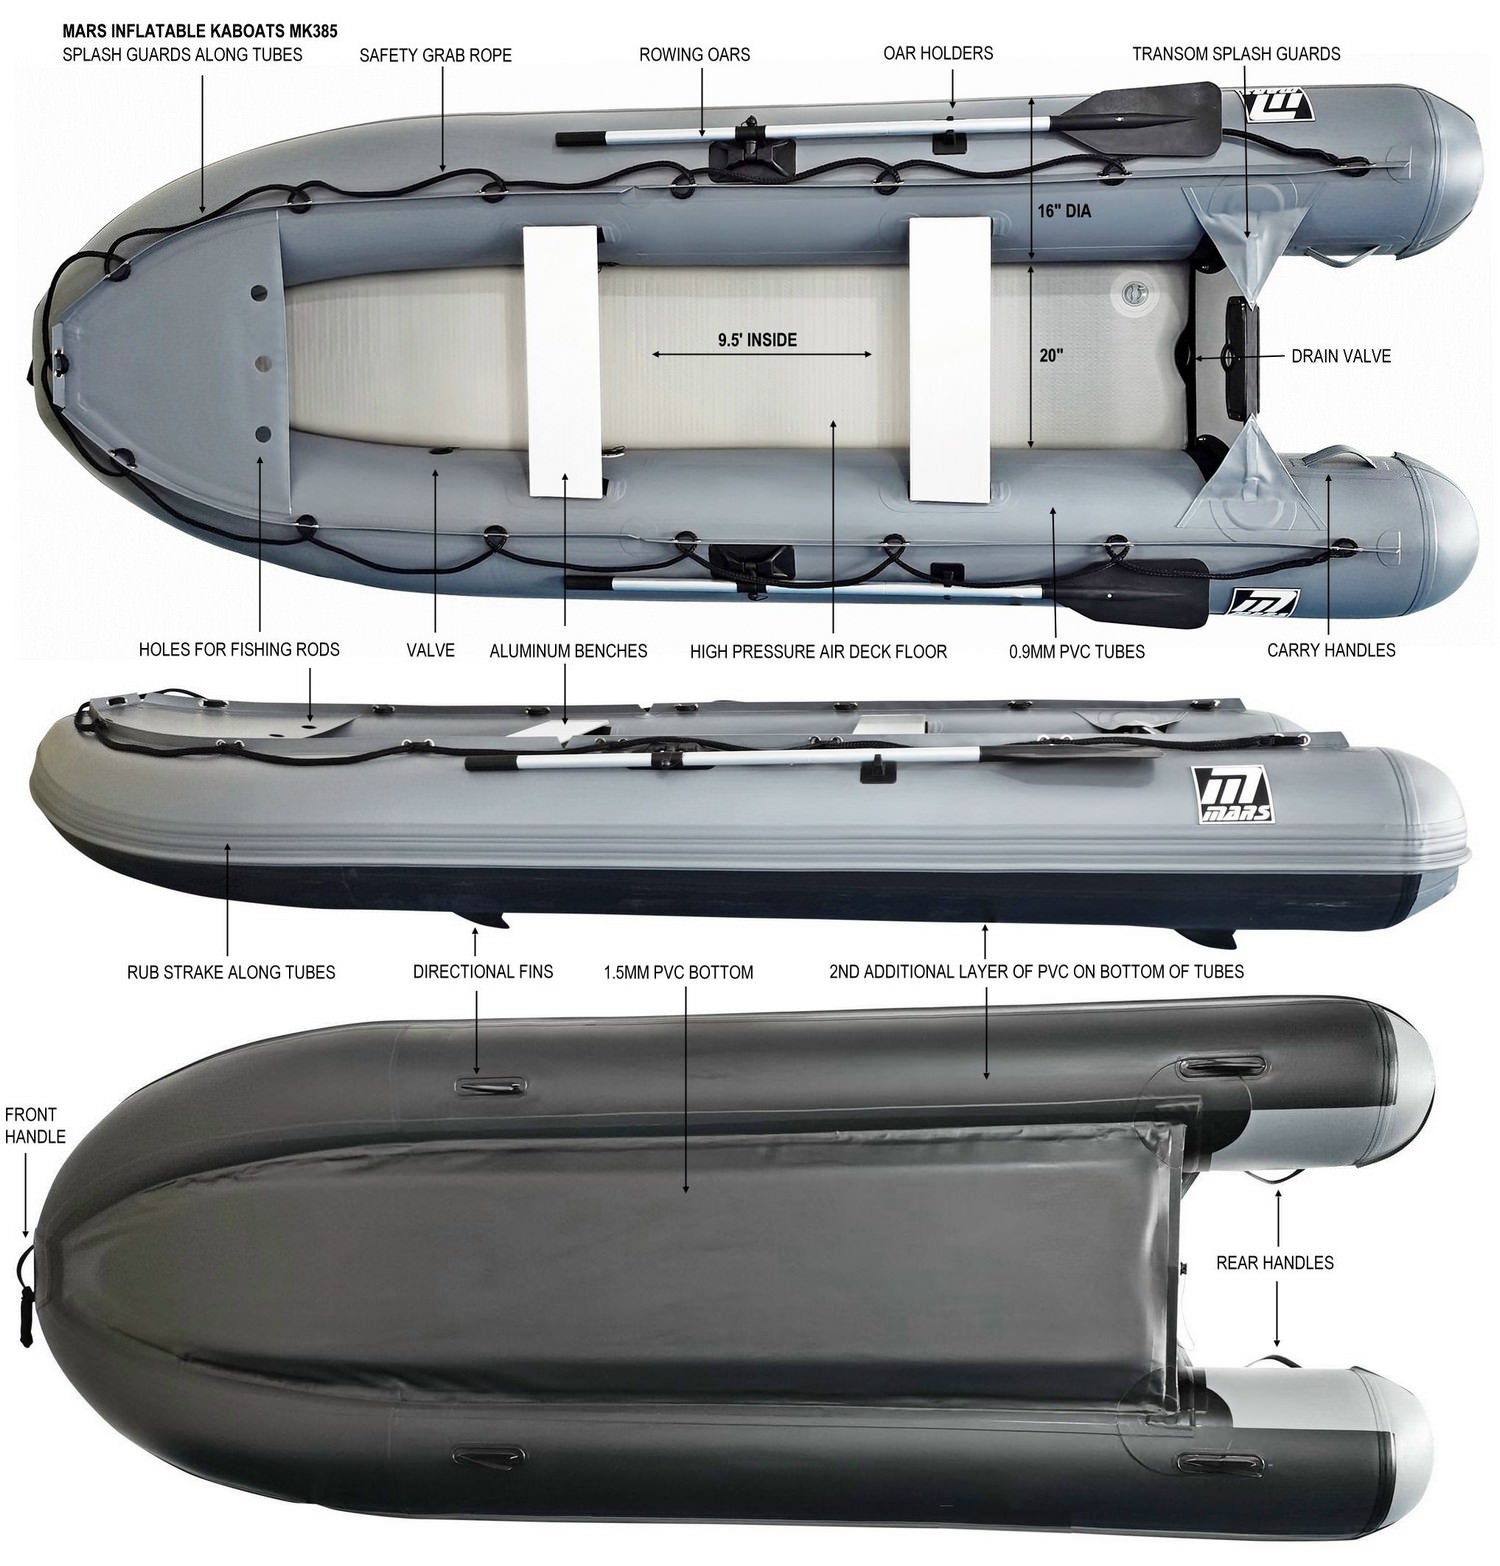 Mars MK385 inflatable boat KaBoat specifications